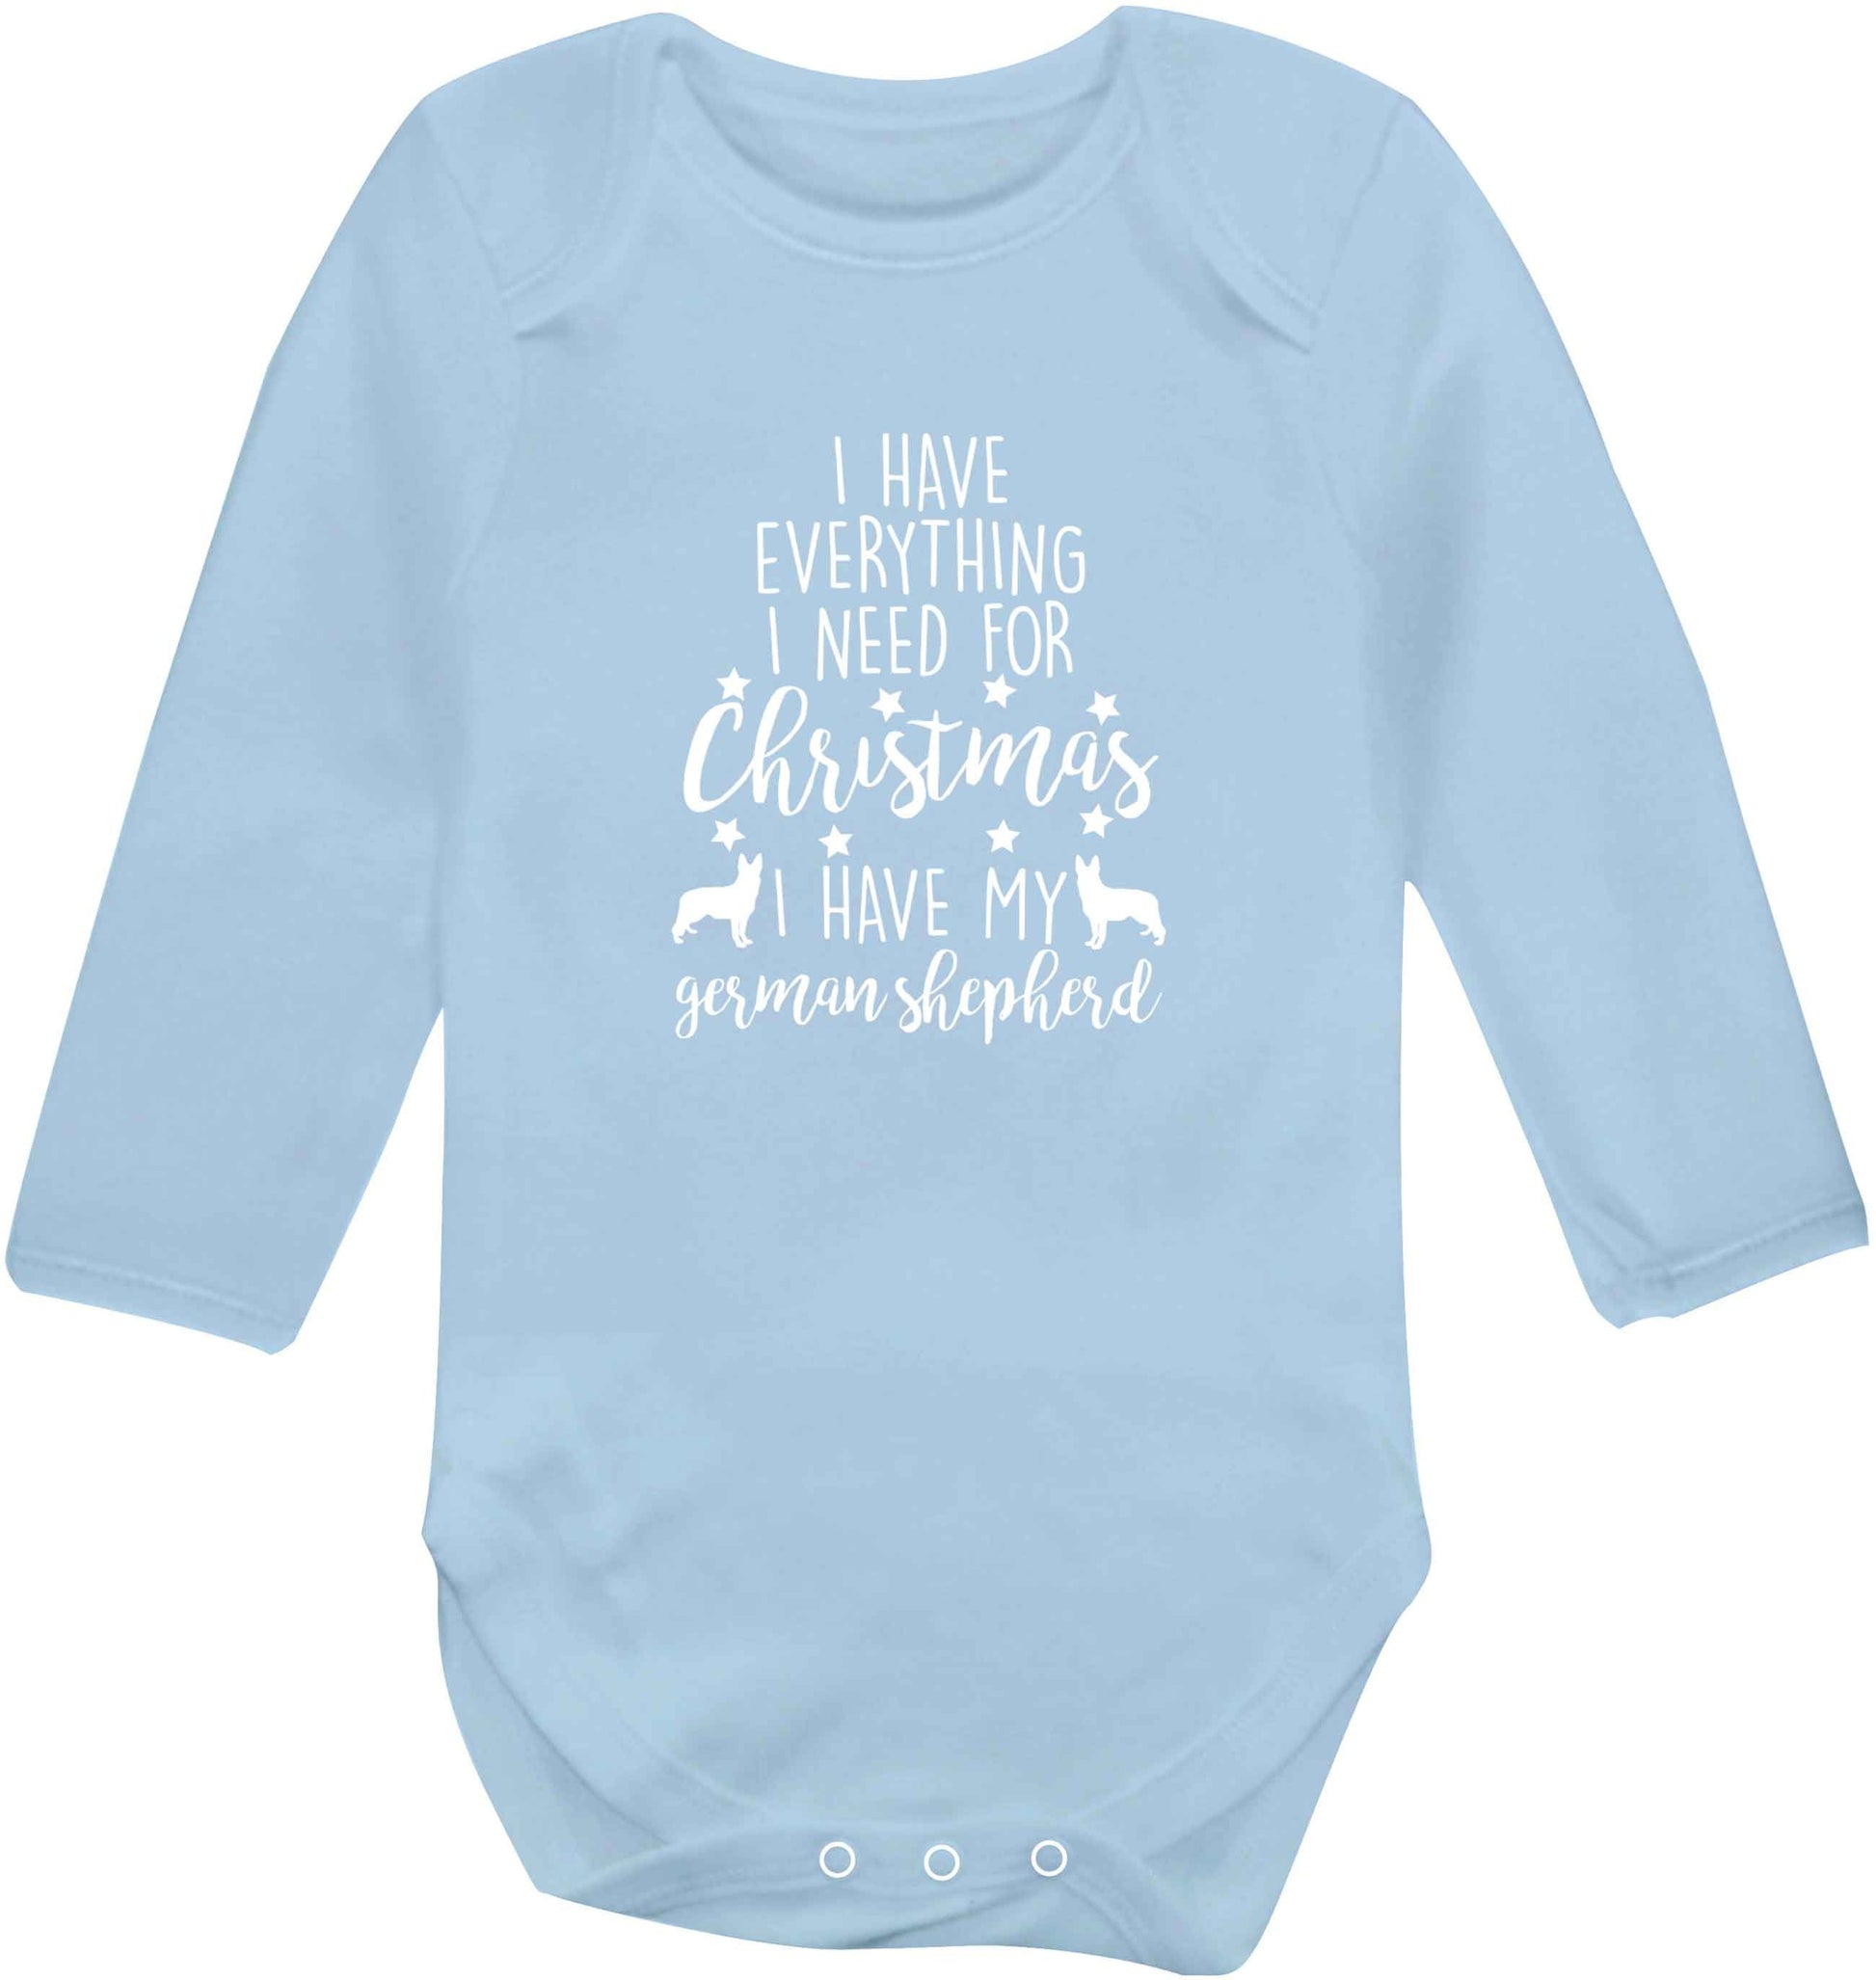 I have everything I need for Christmas I have my german shepherd baby vest long sleeved pale blue 6-12 months